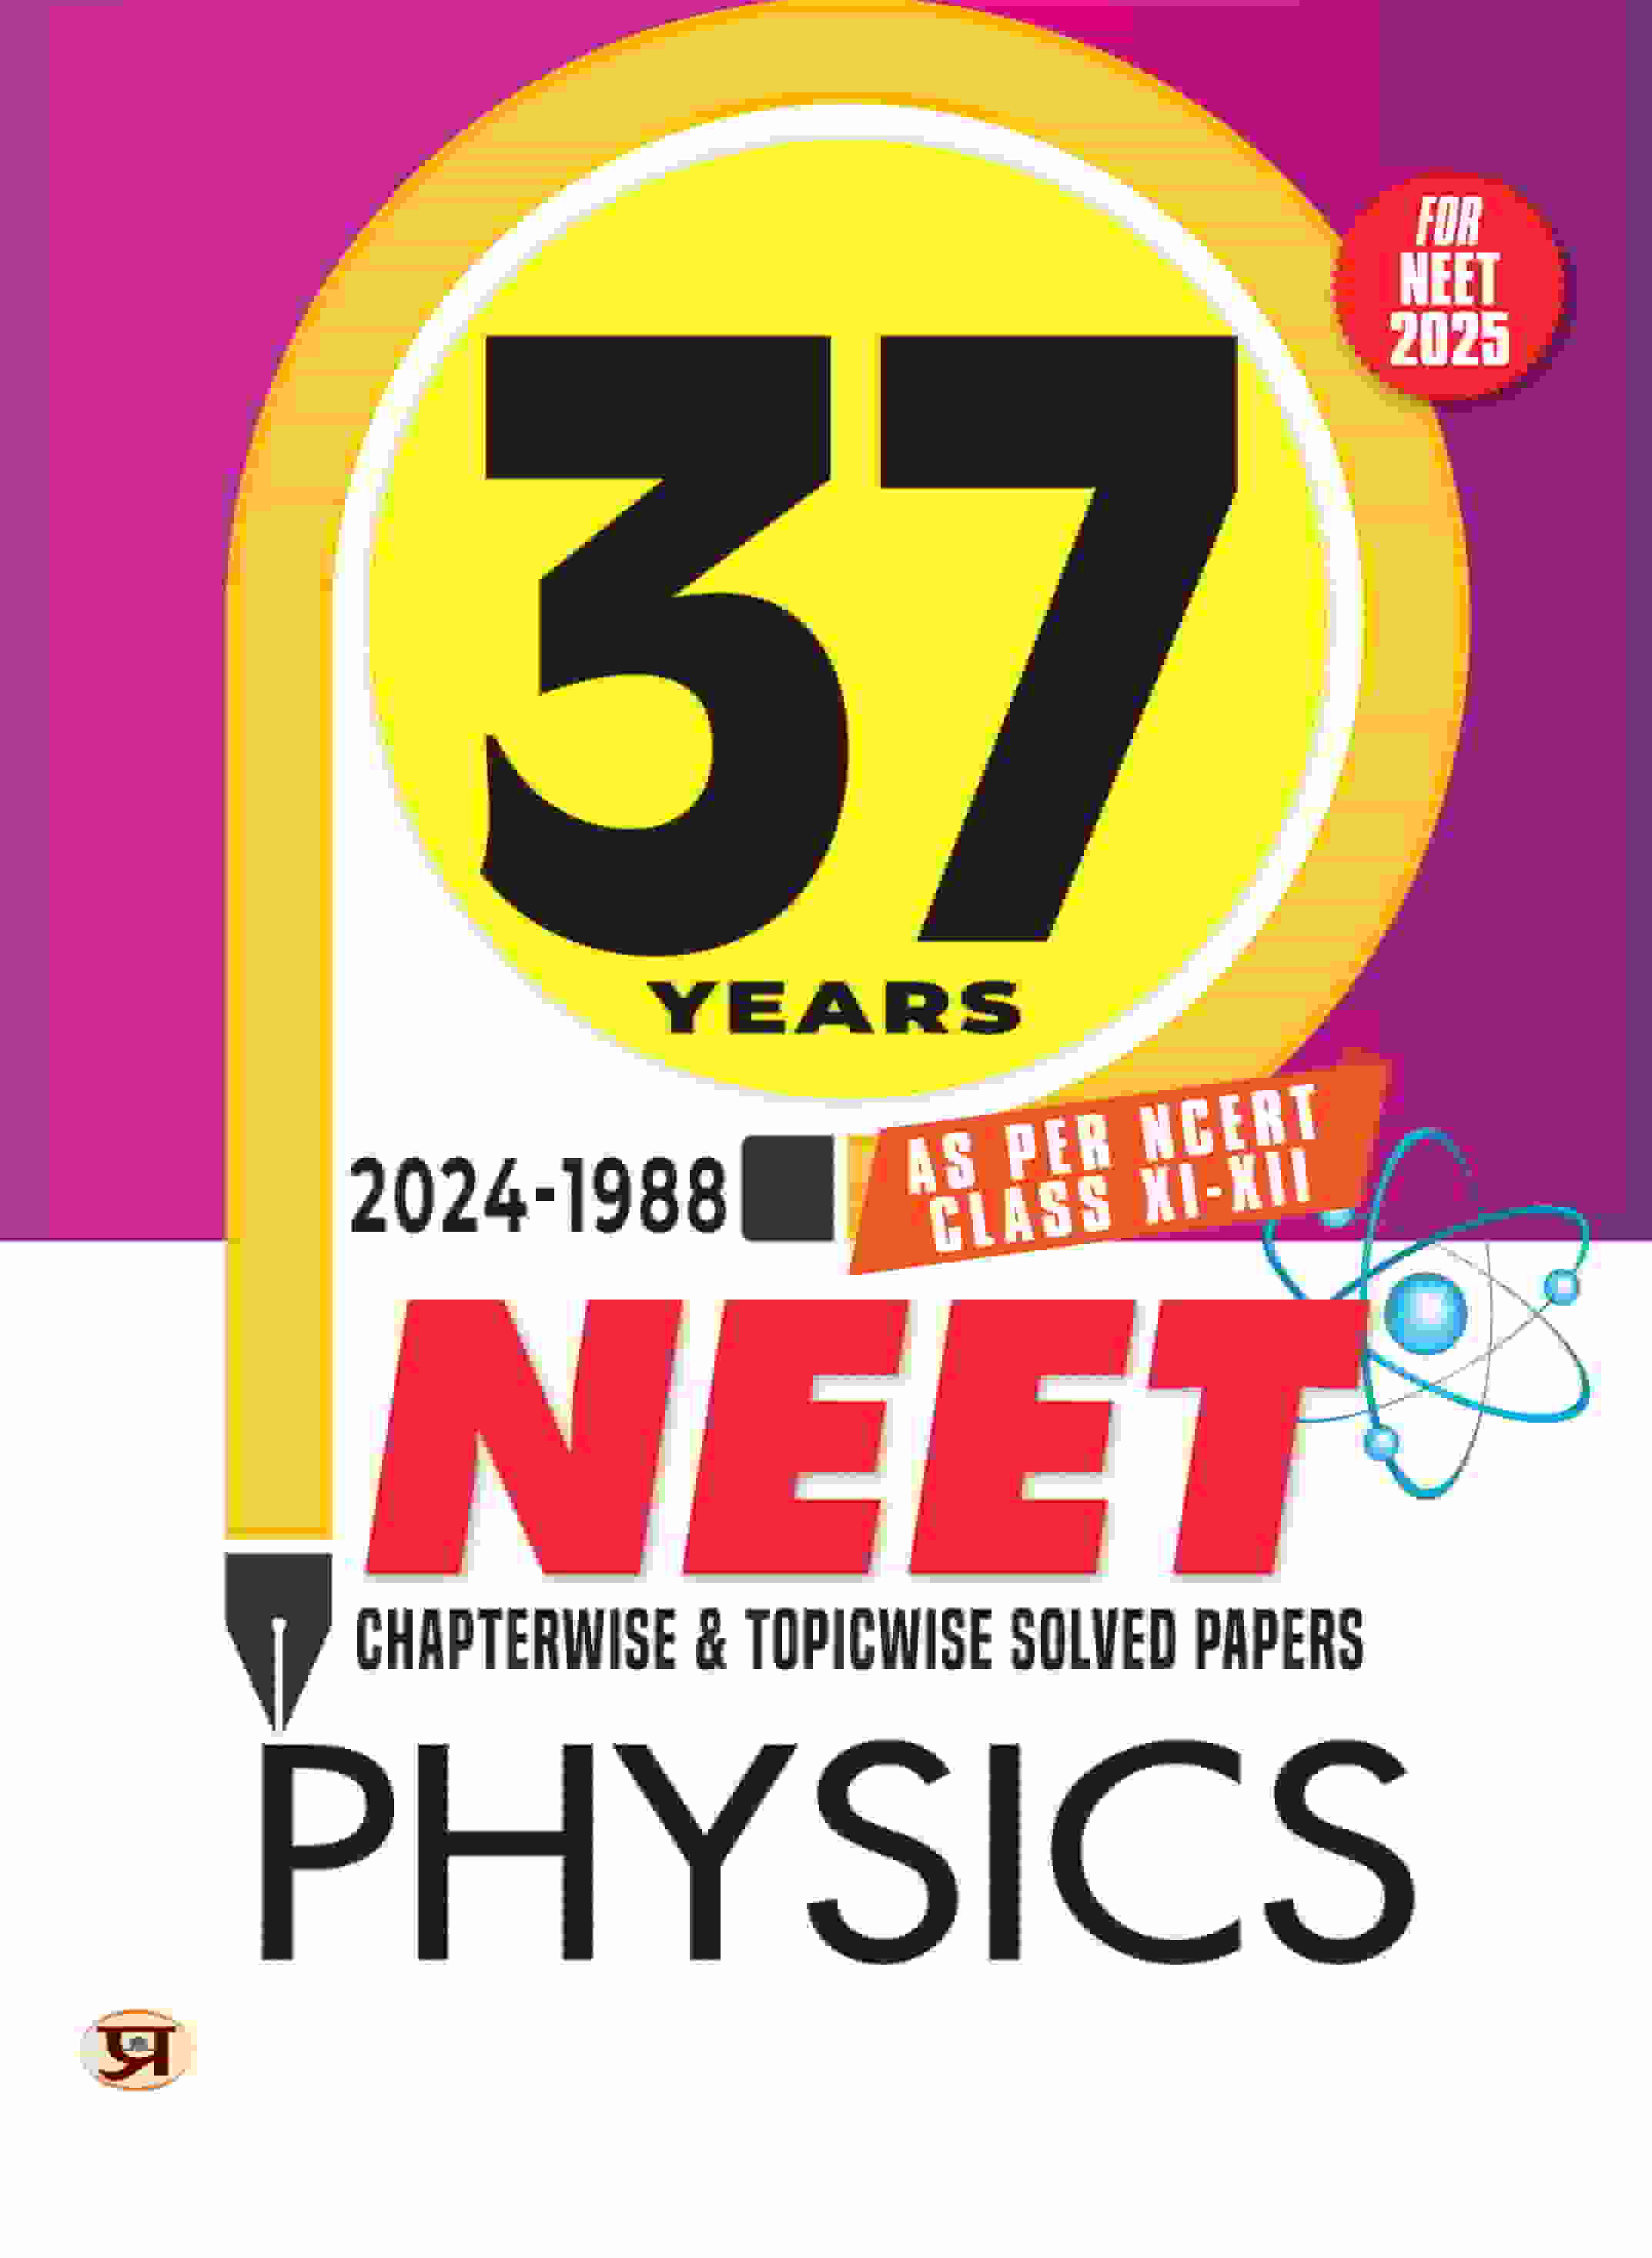 37 Years NEET Chapterwise & Topicwise Solved Papers Physics (2024-1998) | As Per NCERT Class 11 & 12 Include New Syllabus PYQs Question Bank For 2025 Exam